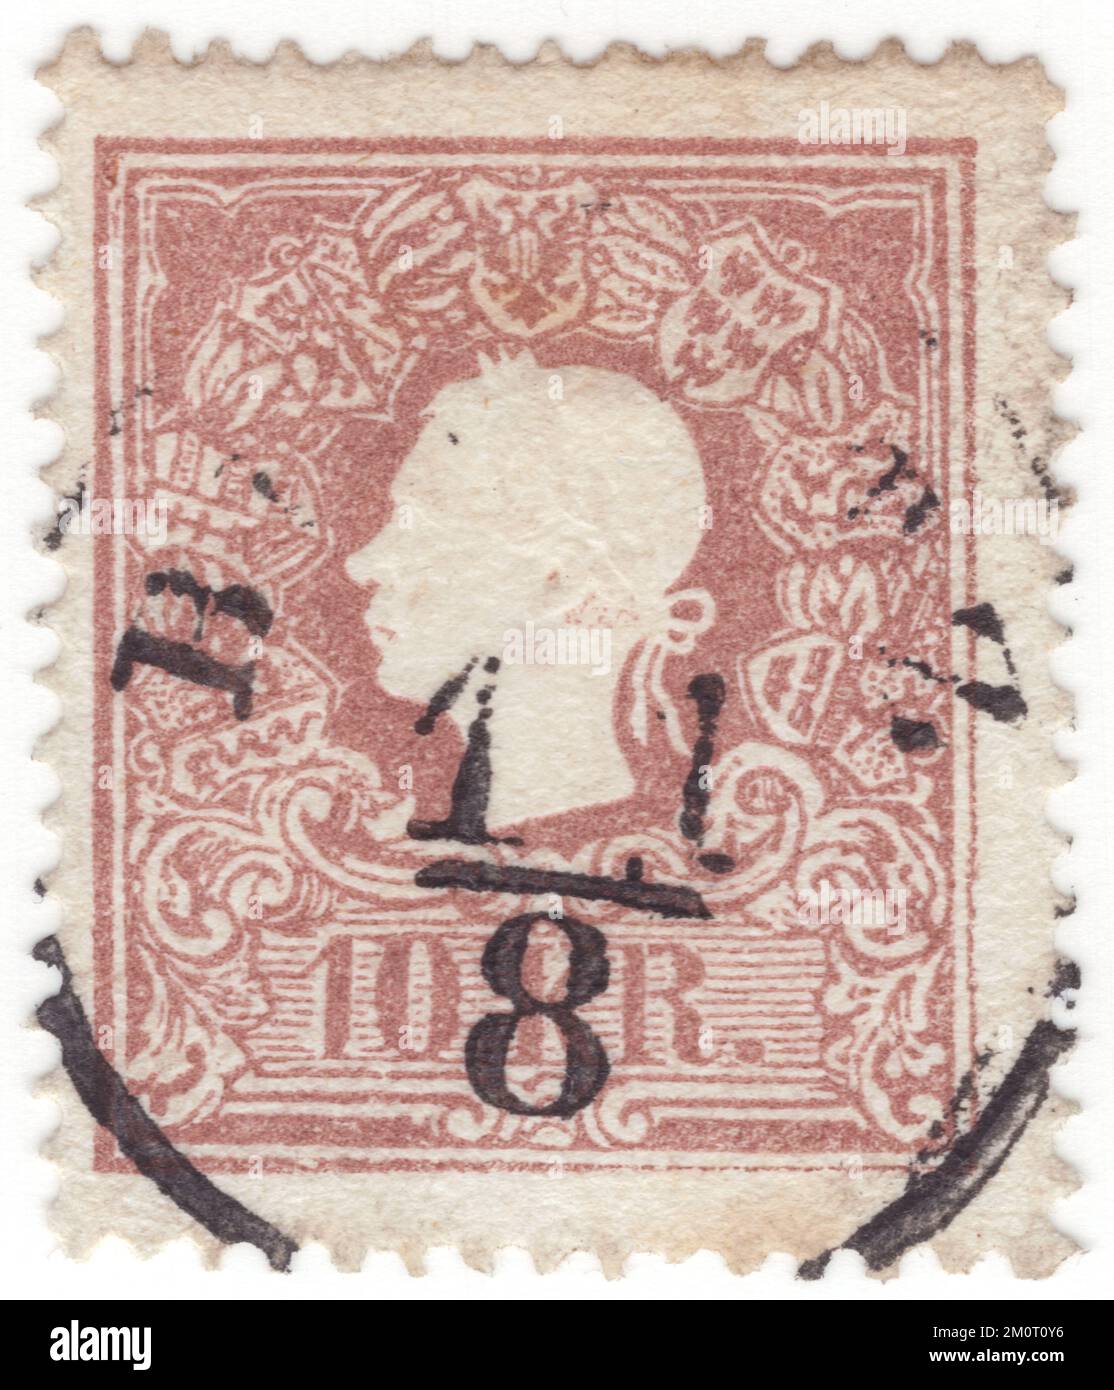 AUSTRIA — 1858: An 10 kreuzer red postage stamp depicting Embossed portrait of young Austrian Monarch Emperor Franz Josef. Franz Joseph I or Francis Joseph I was Emperor of Austria, King of Hungary, and the other states of the Habsburg monarchy from 2 December 1848 until his death on 21 November 1916. In the early part of his reign, his realms and territories were referred to as the Austrian Empire, but were reconstituted as the dual monarchy of the Austro-Hungarian Empire in 1867. From 1 May 1850 to 24 August 1866, Franz Joseph was also President of the German Confederation Stock Photo